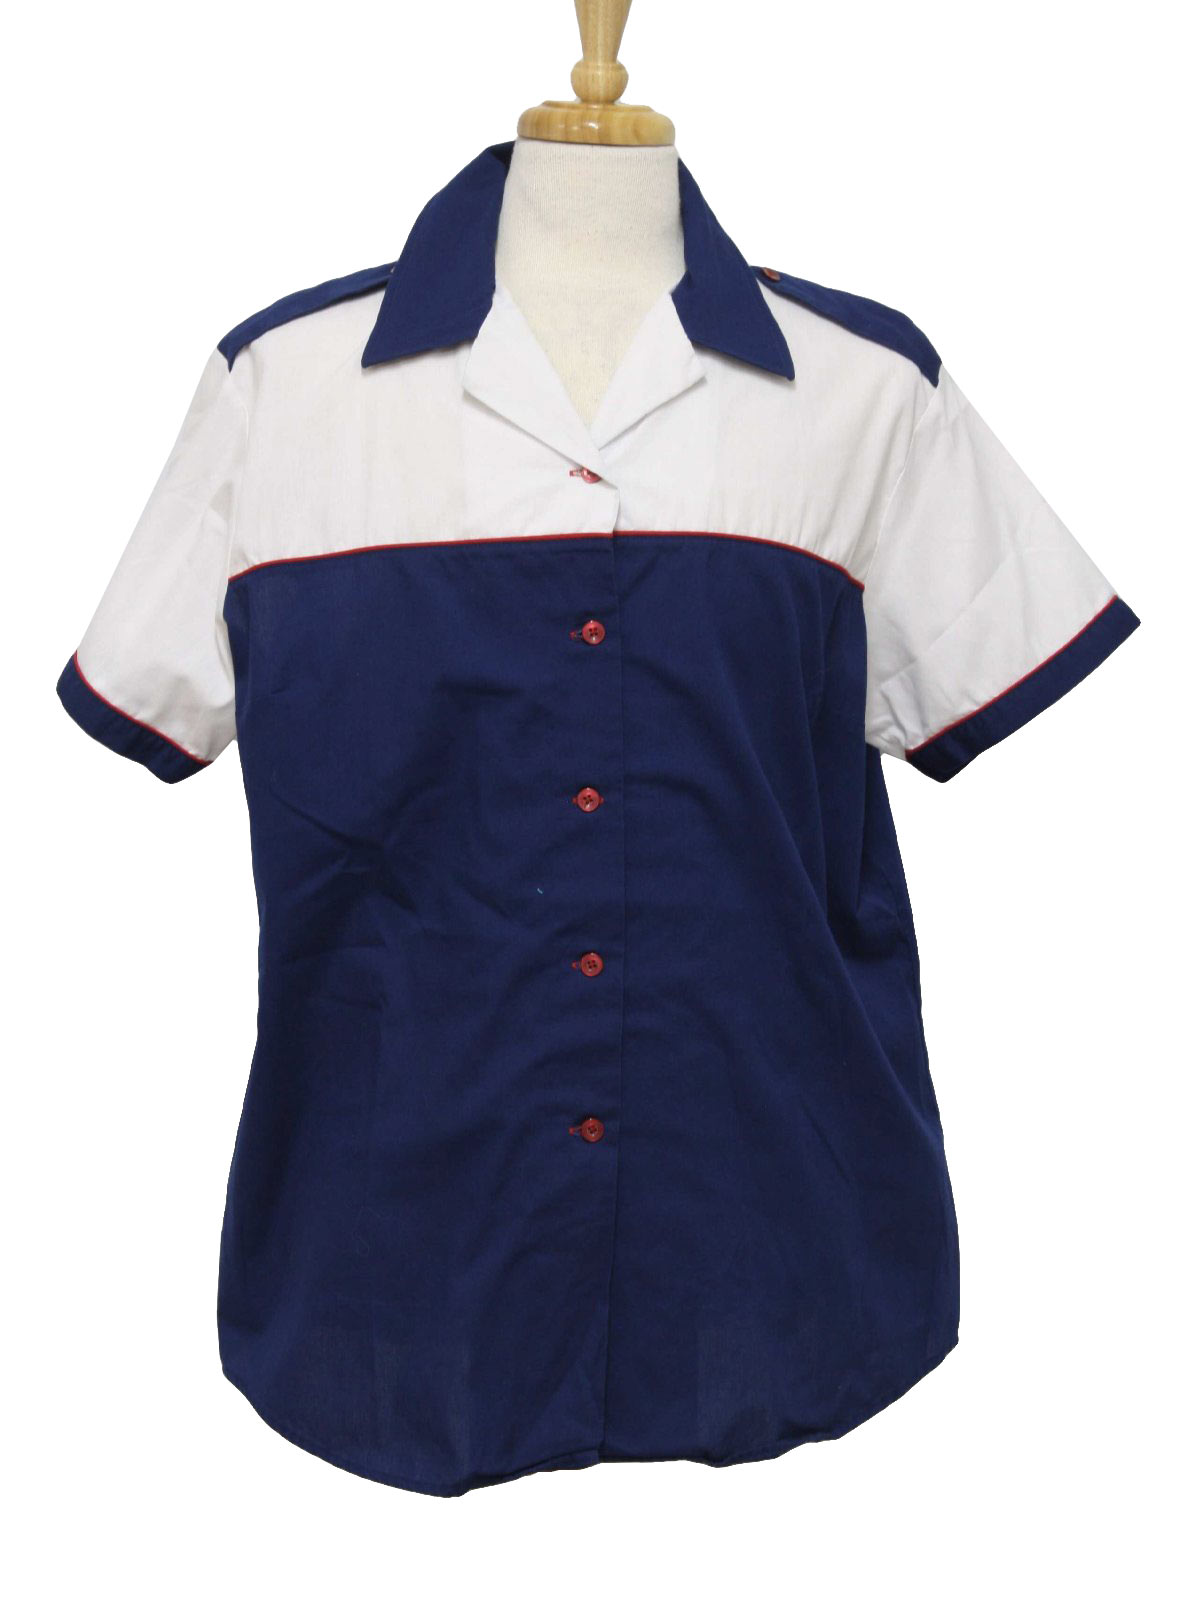 Retro 1980s Bowling Shirt: Early 80s -King Louie Creations- Womens navy ...